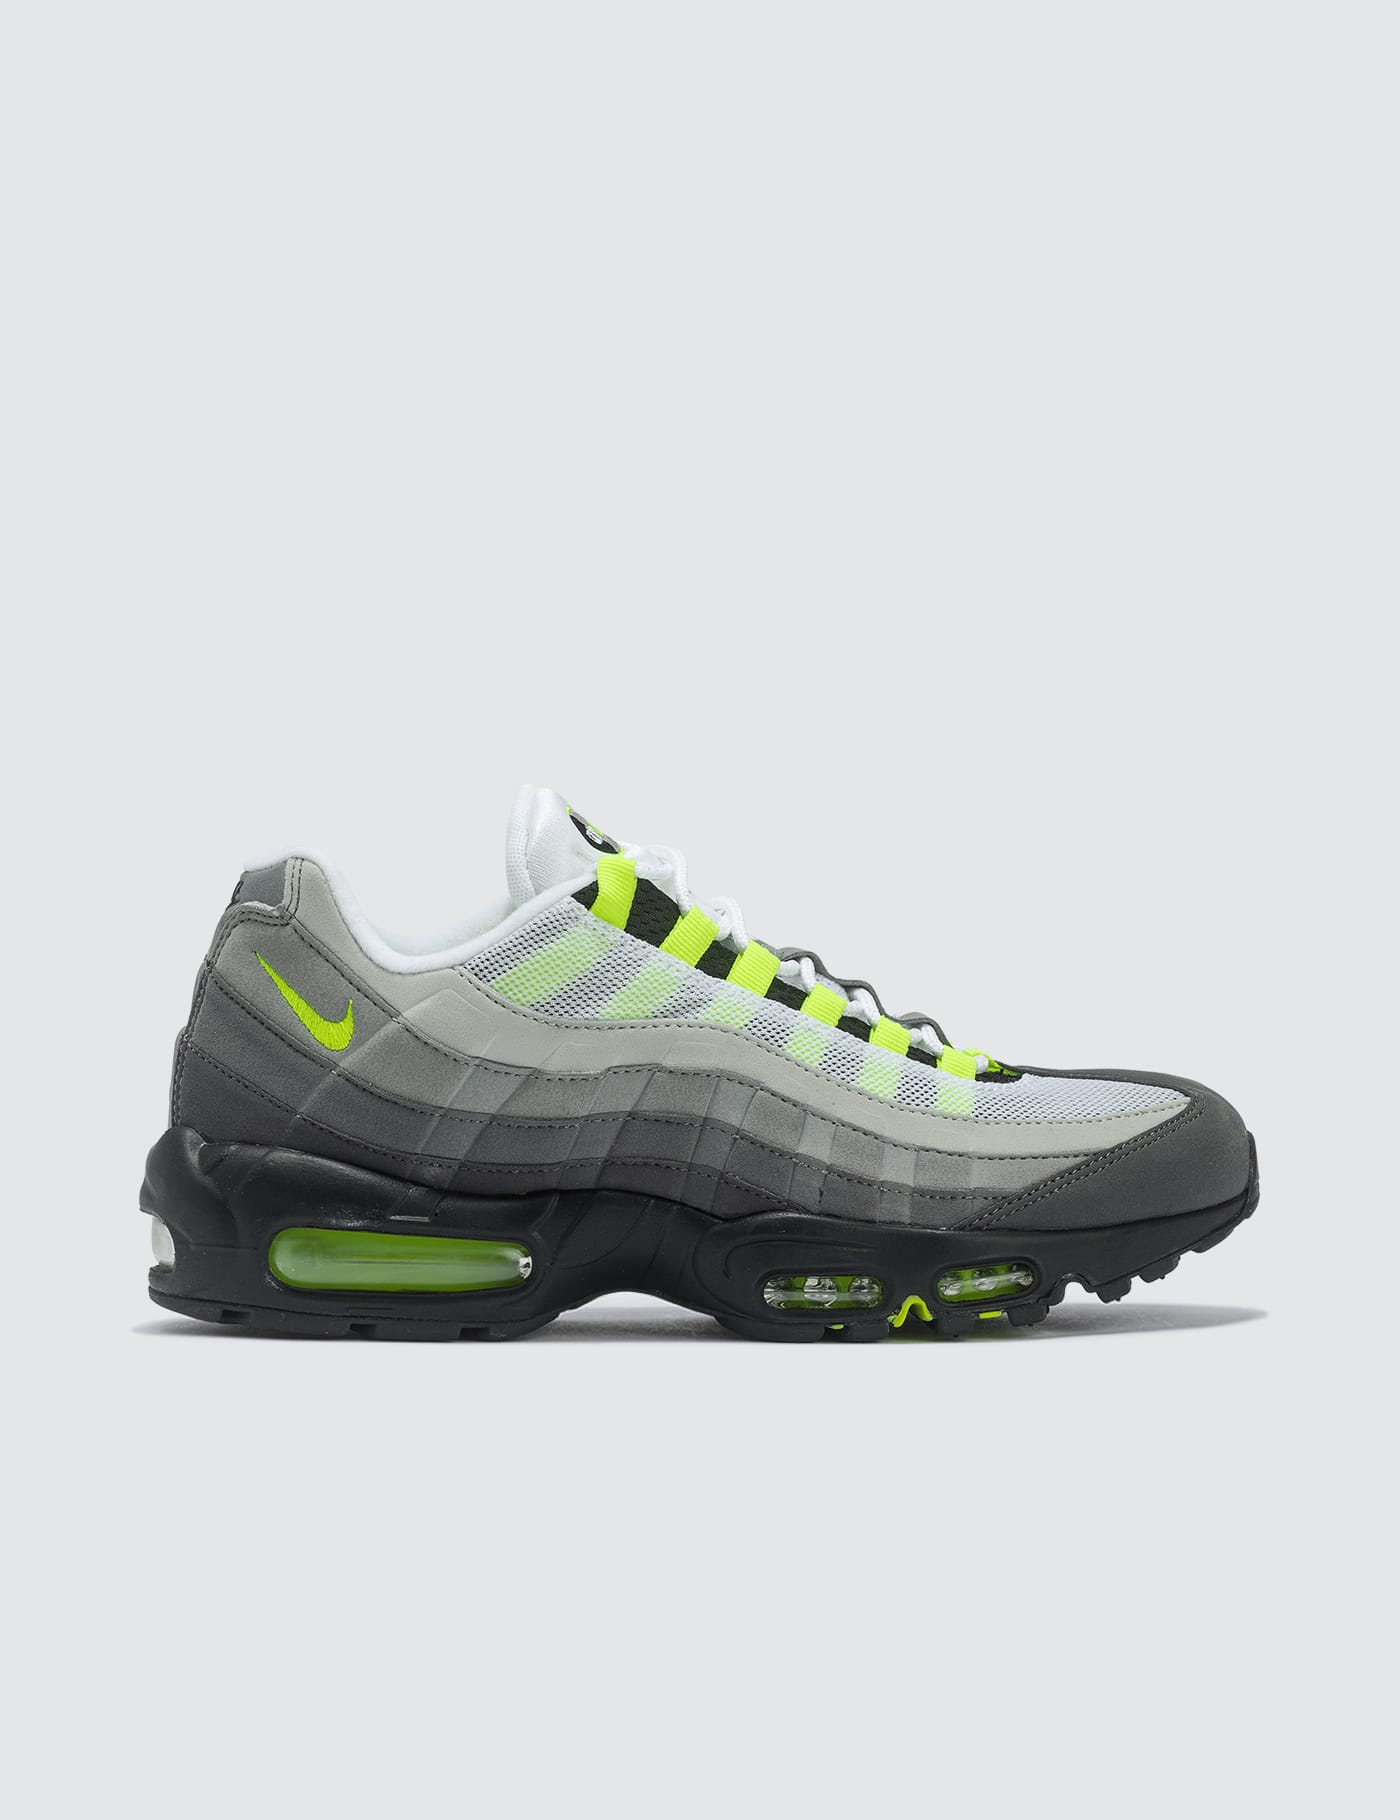 Nike - Air Max 95 Og Neon (2015) | HBX - Globally Curated Fashion ...